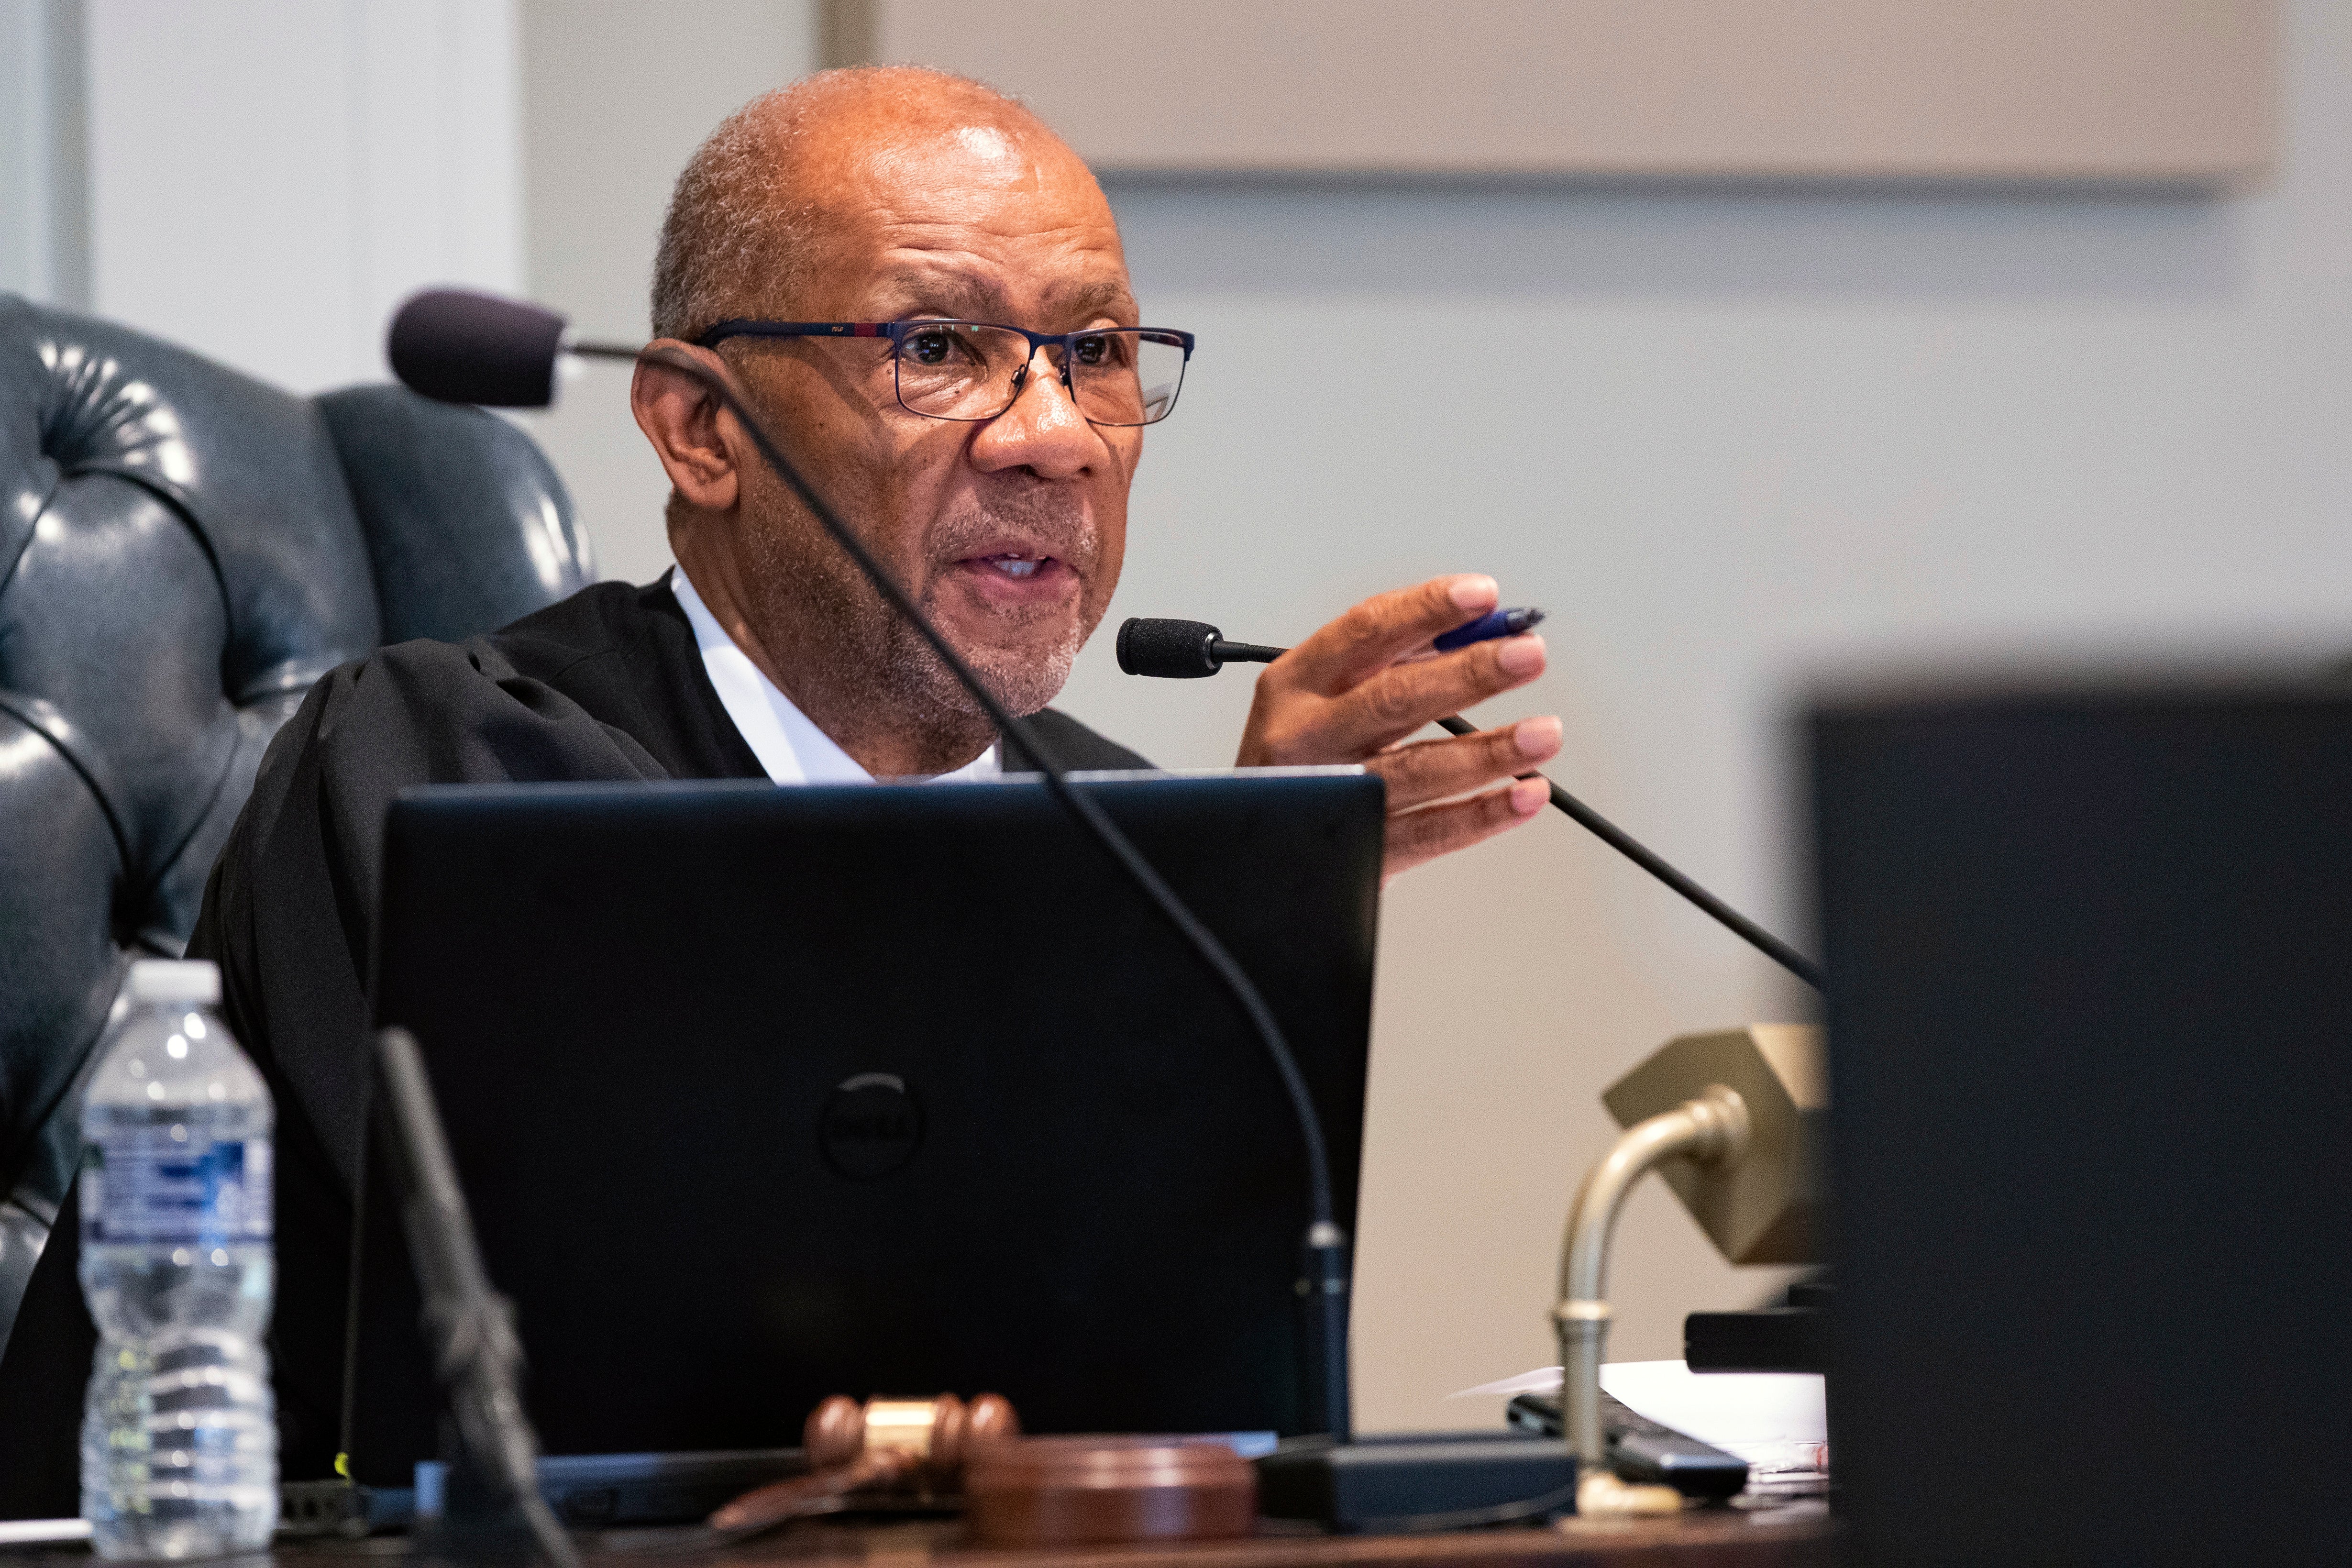 Judge Clifton Newman, who presided over Murdaugh’s trial, has stepped down from presiding over any motions relating to the murder case. He will still preside over the financial crimes trial